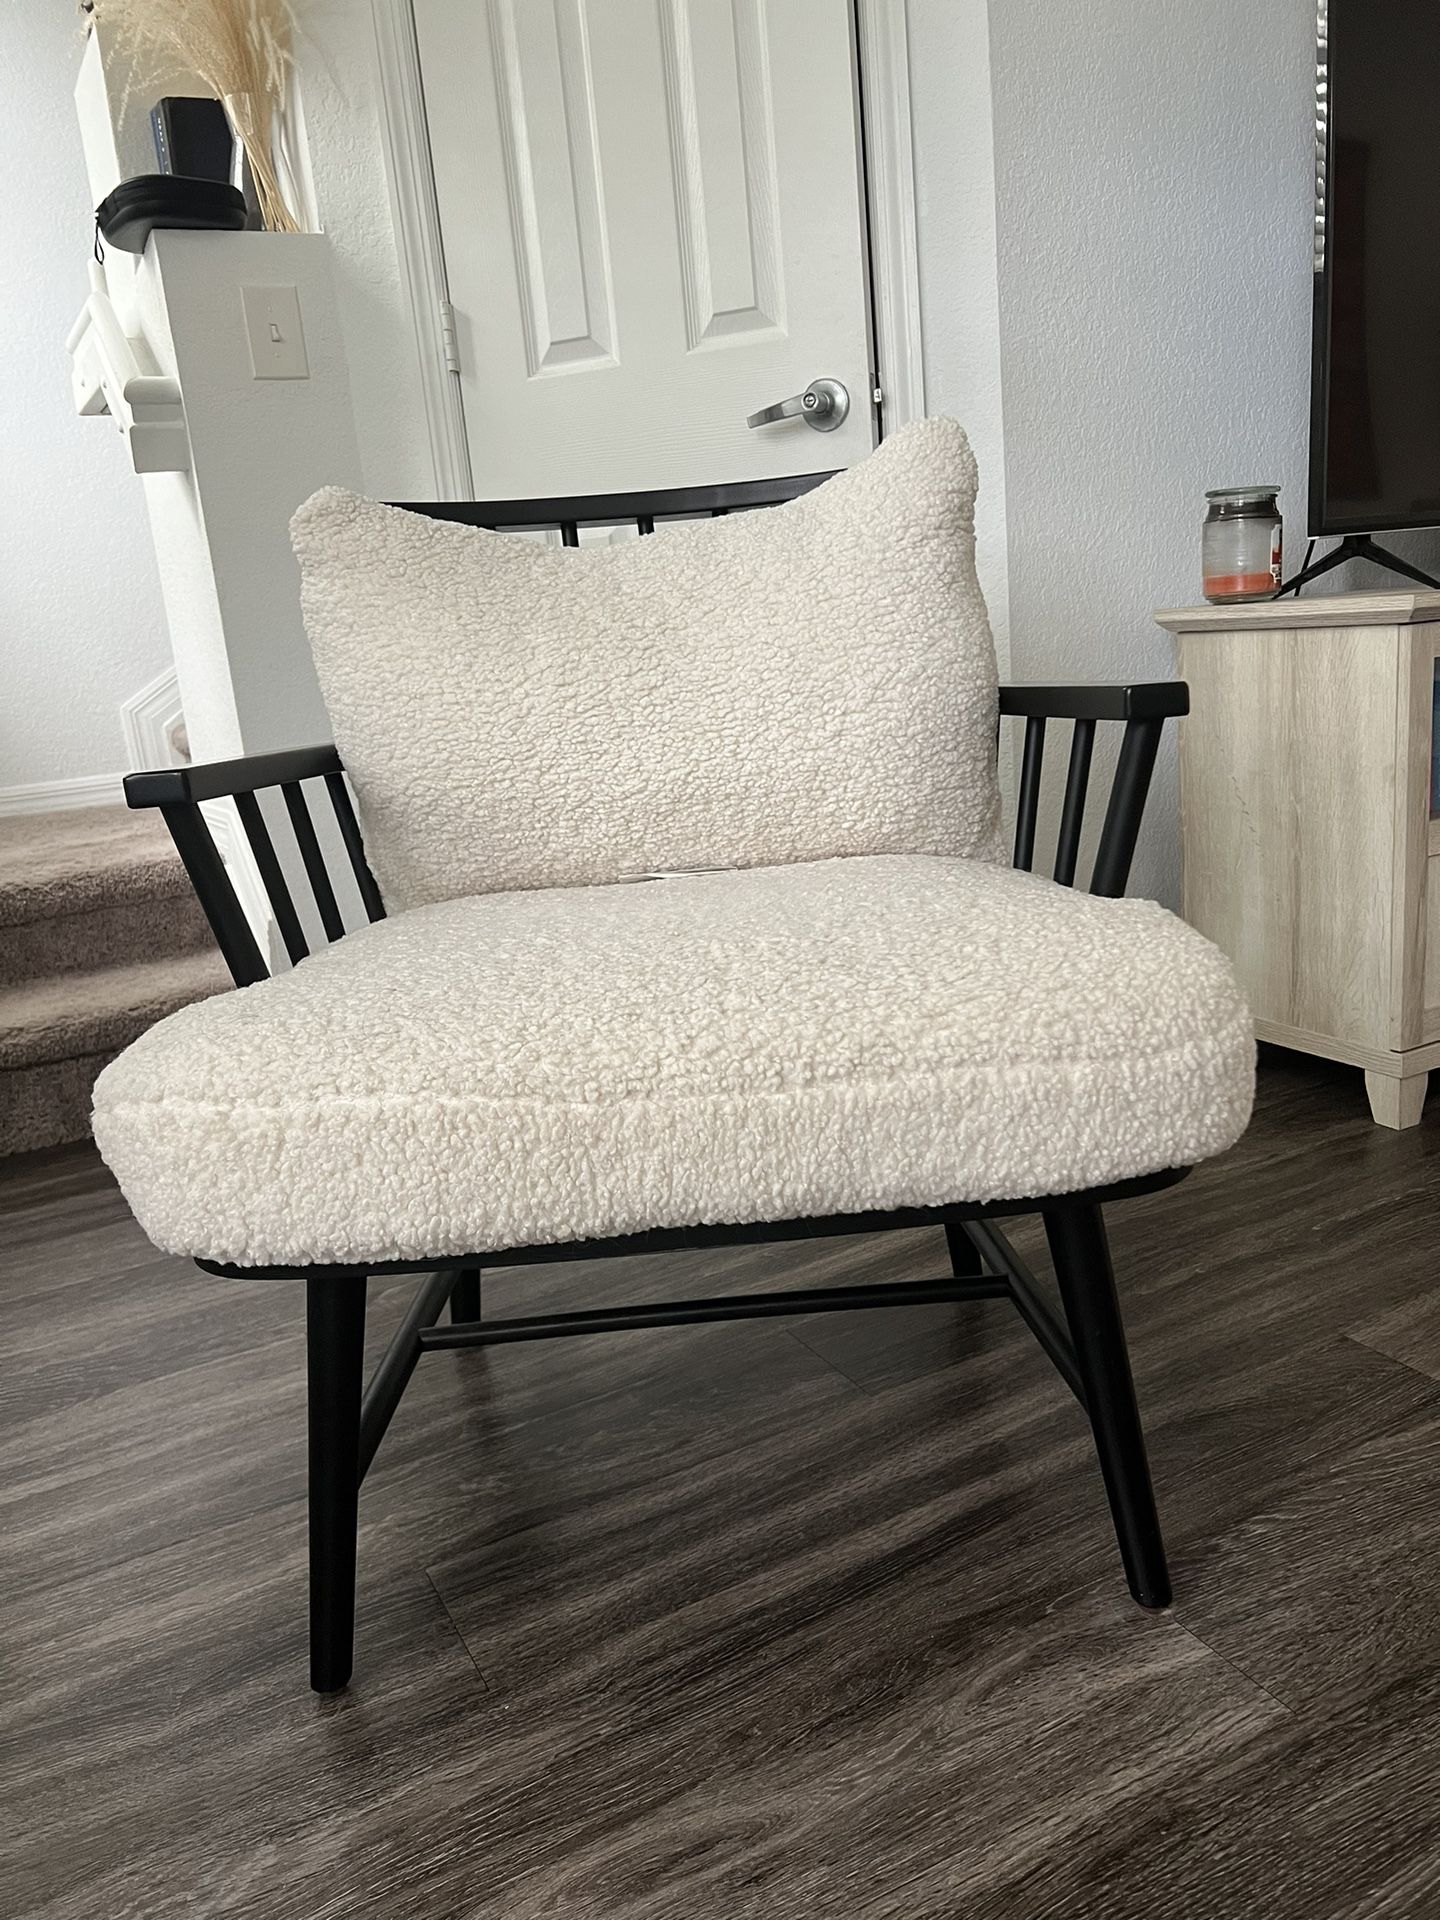 Wooden Accent Chair With Plush Seating